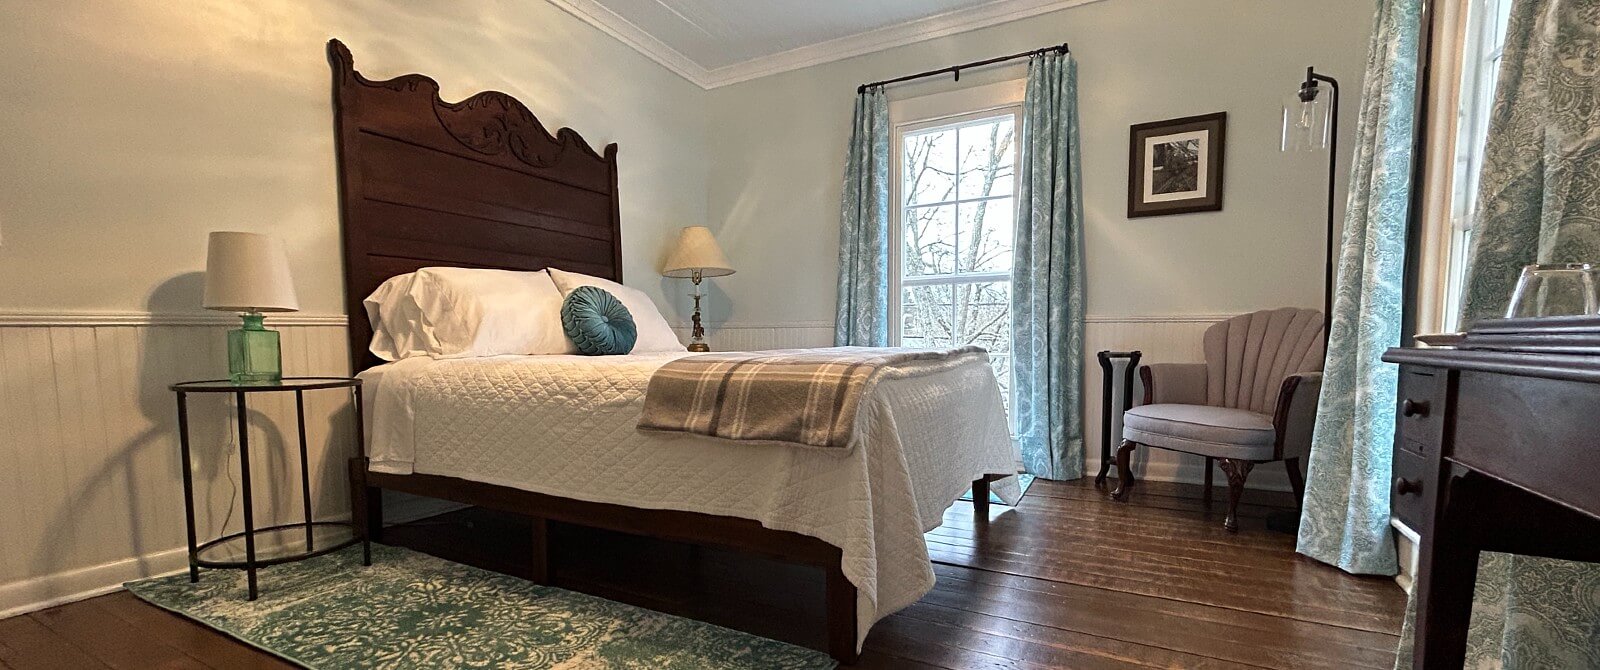 Guest room with queen bed with large antique headboard, side tables with lamps and large windows with floral curtains